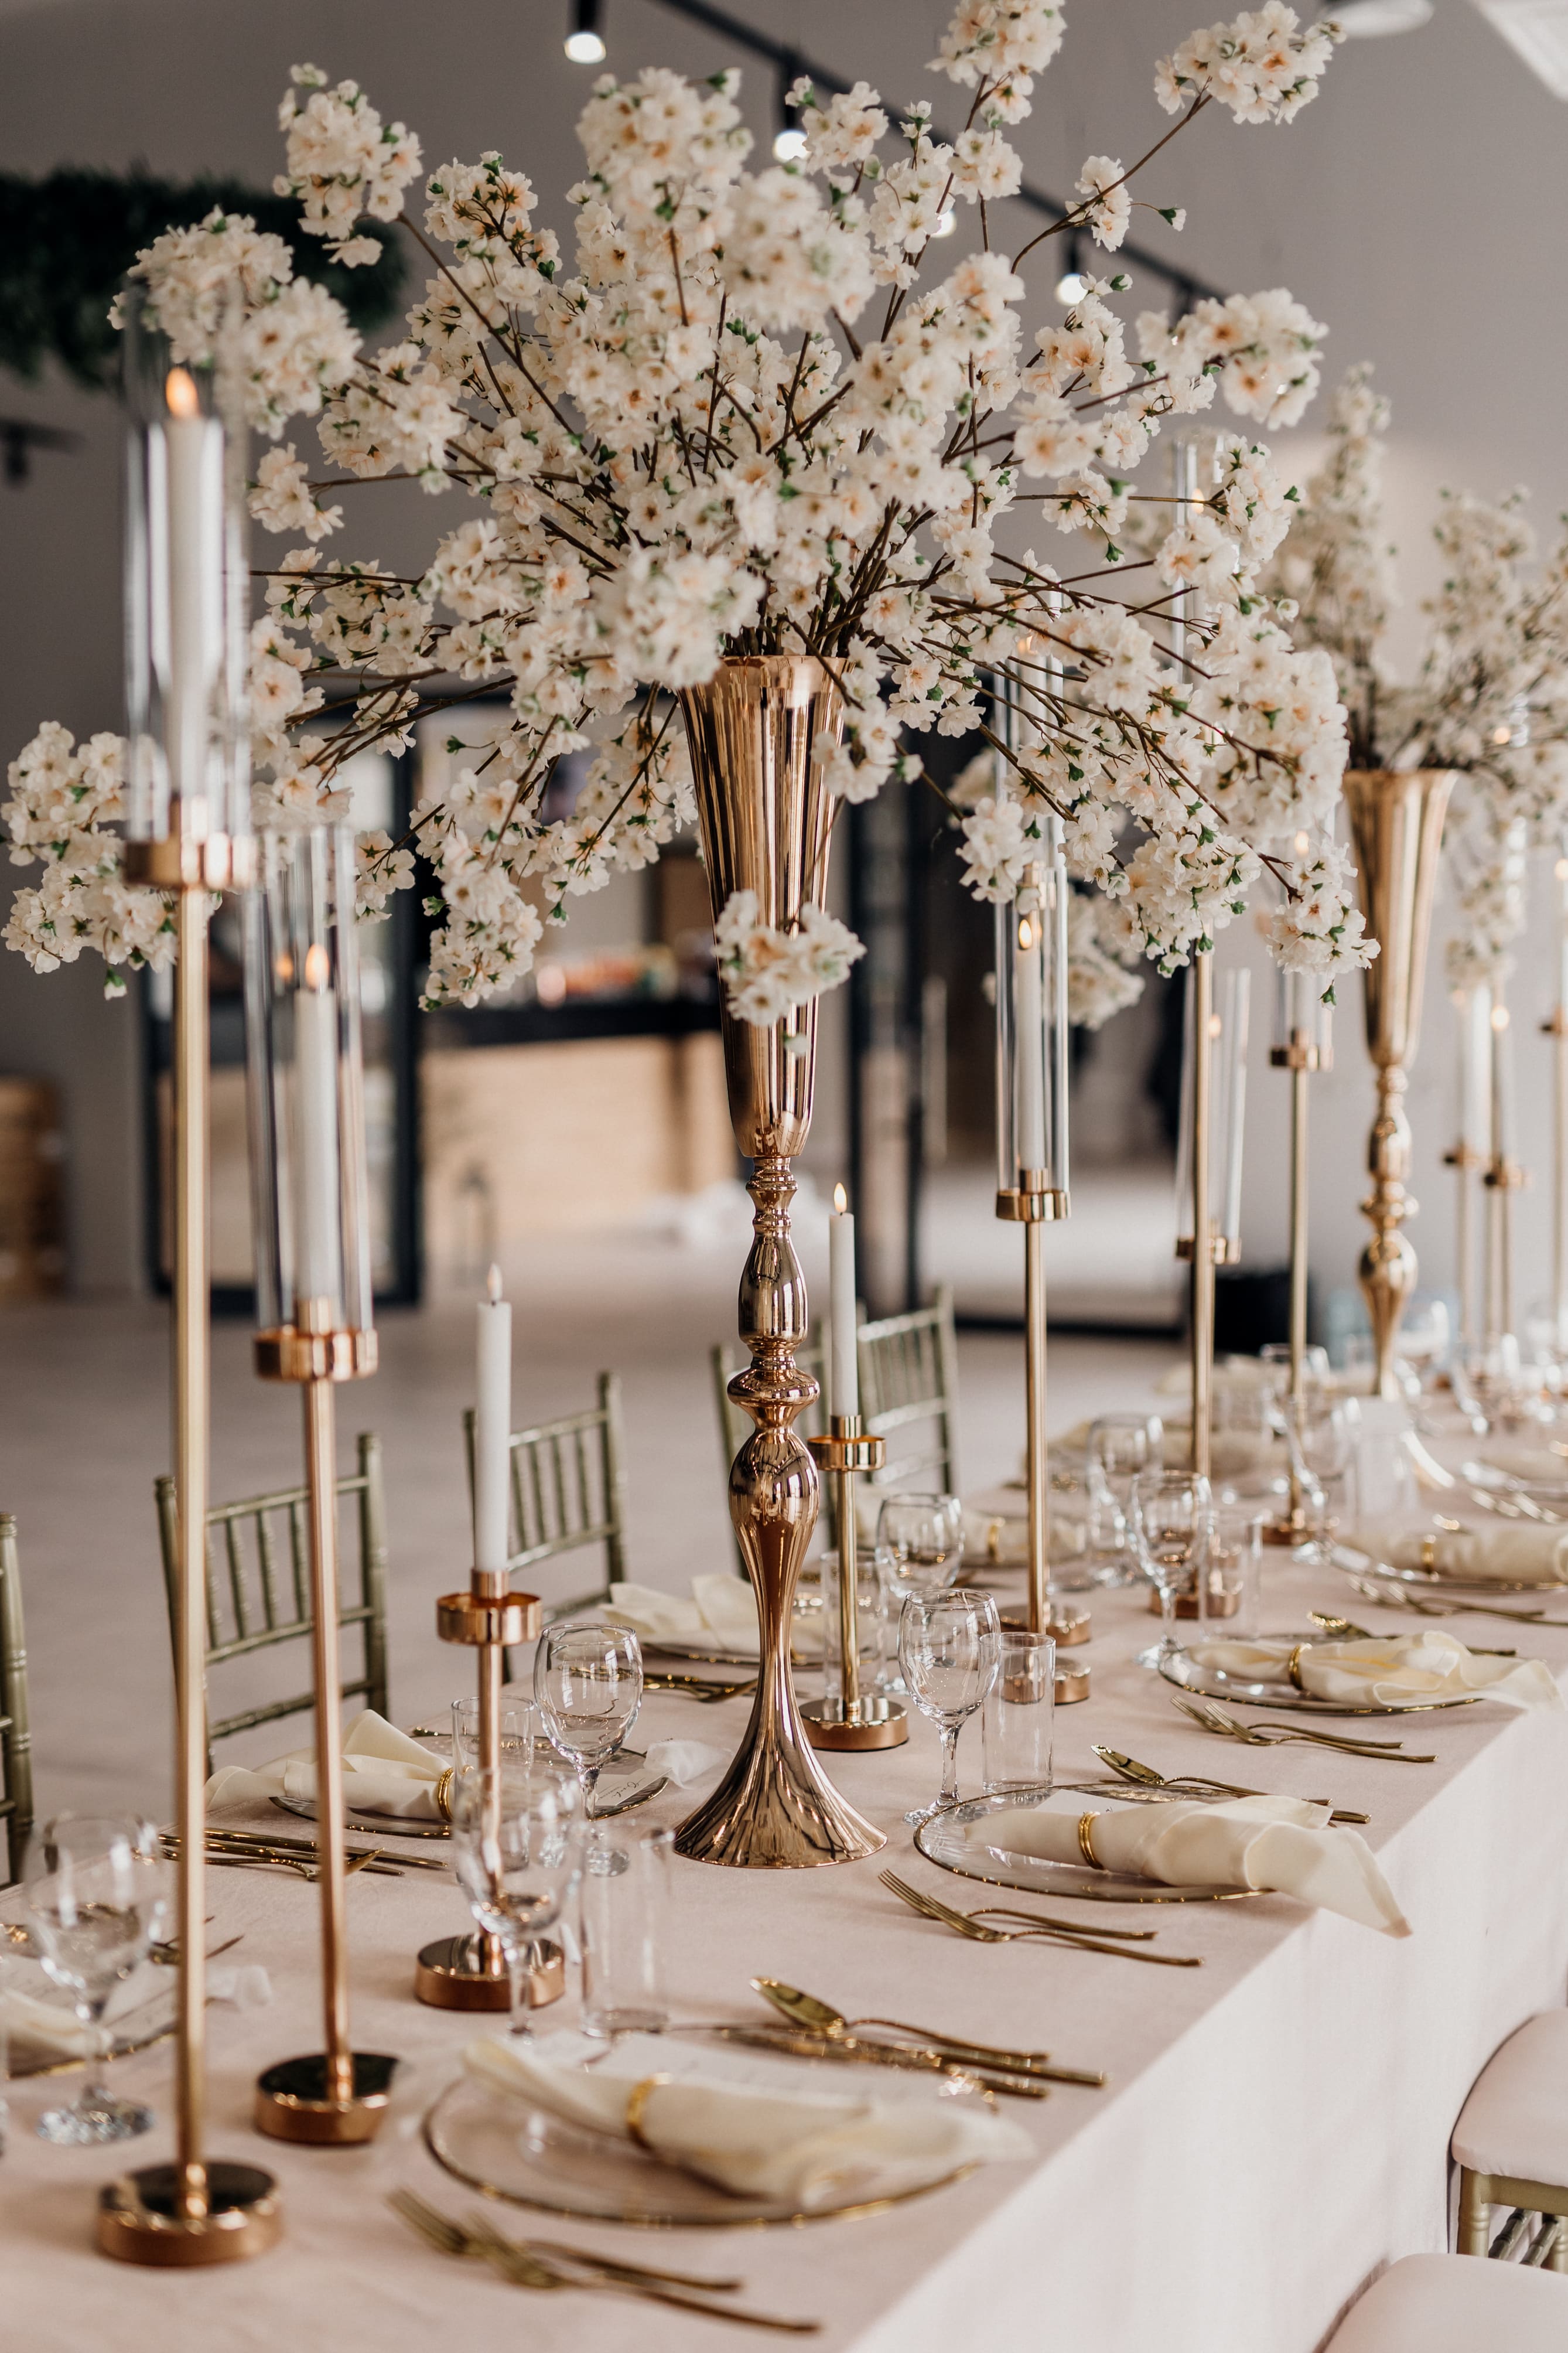 A table with wedding decorations